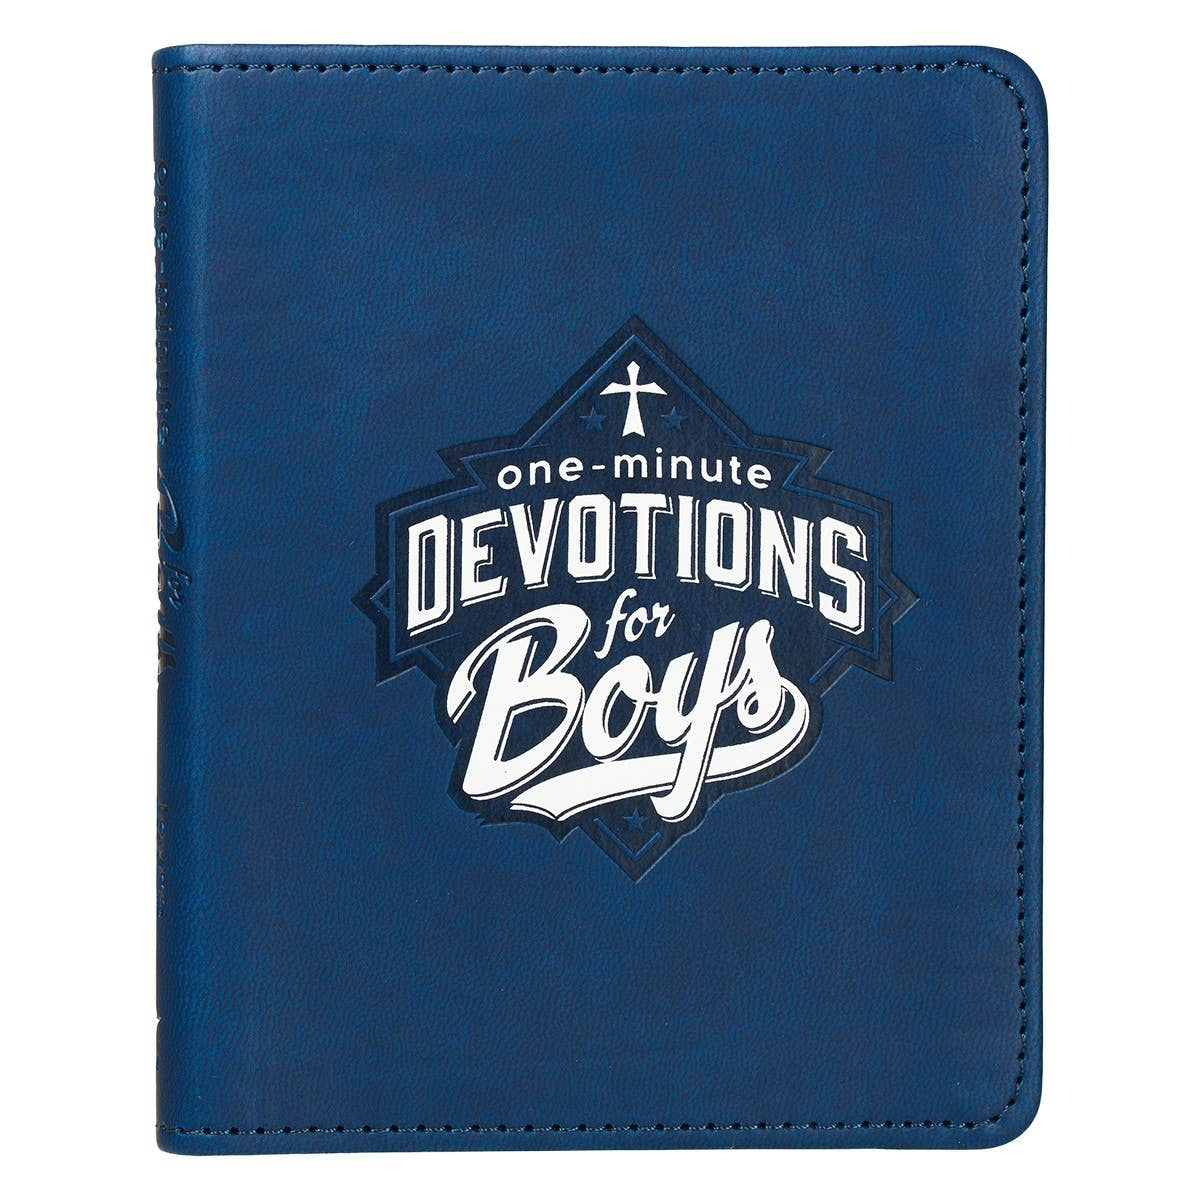 One-Minute Devotions for Boys Blue Faux Leather Devotional - An Initial Impression